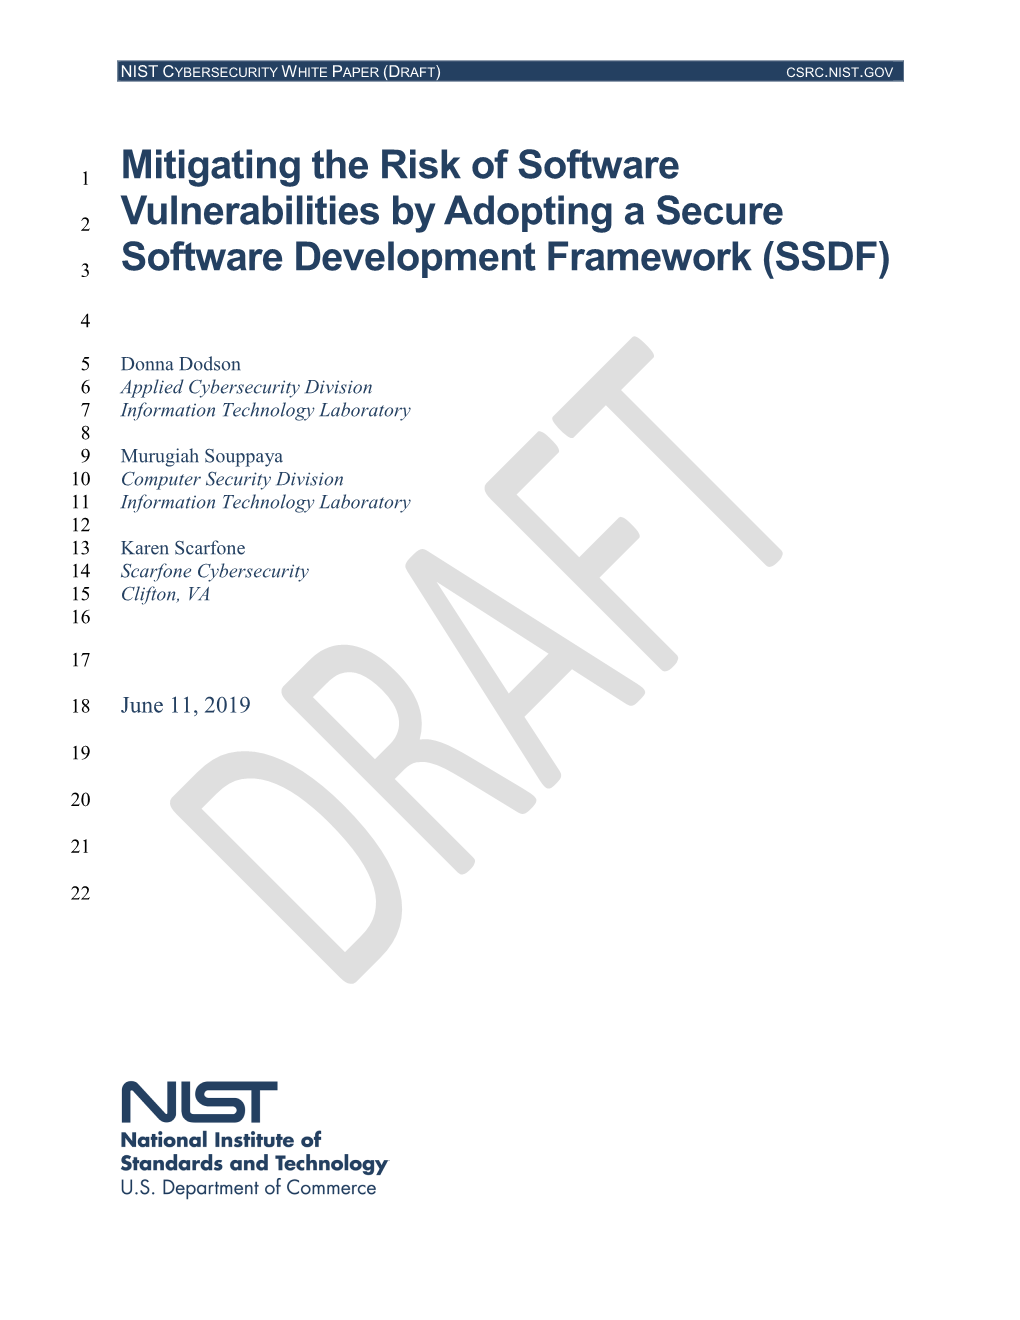 (Draft) Mitigating the Risk of Software Vulnerabilities by Adopting A